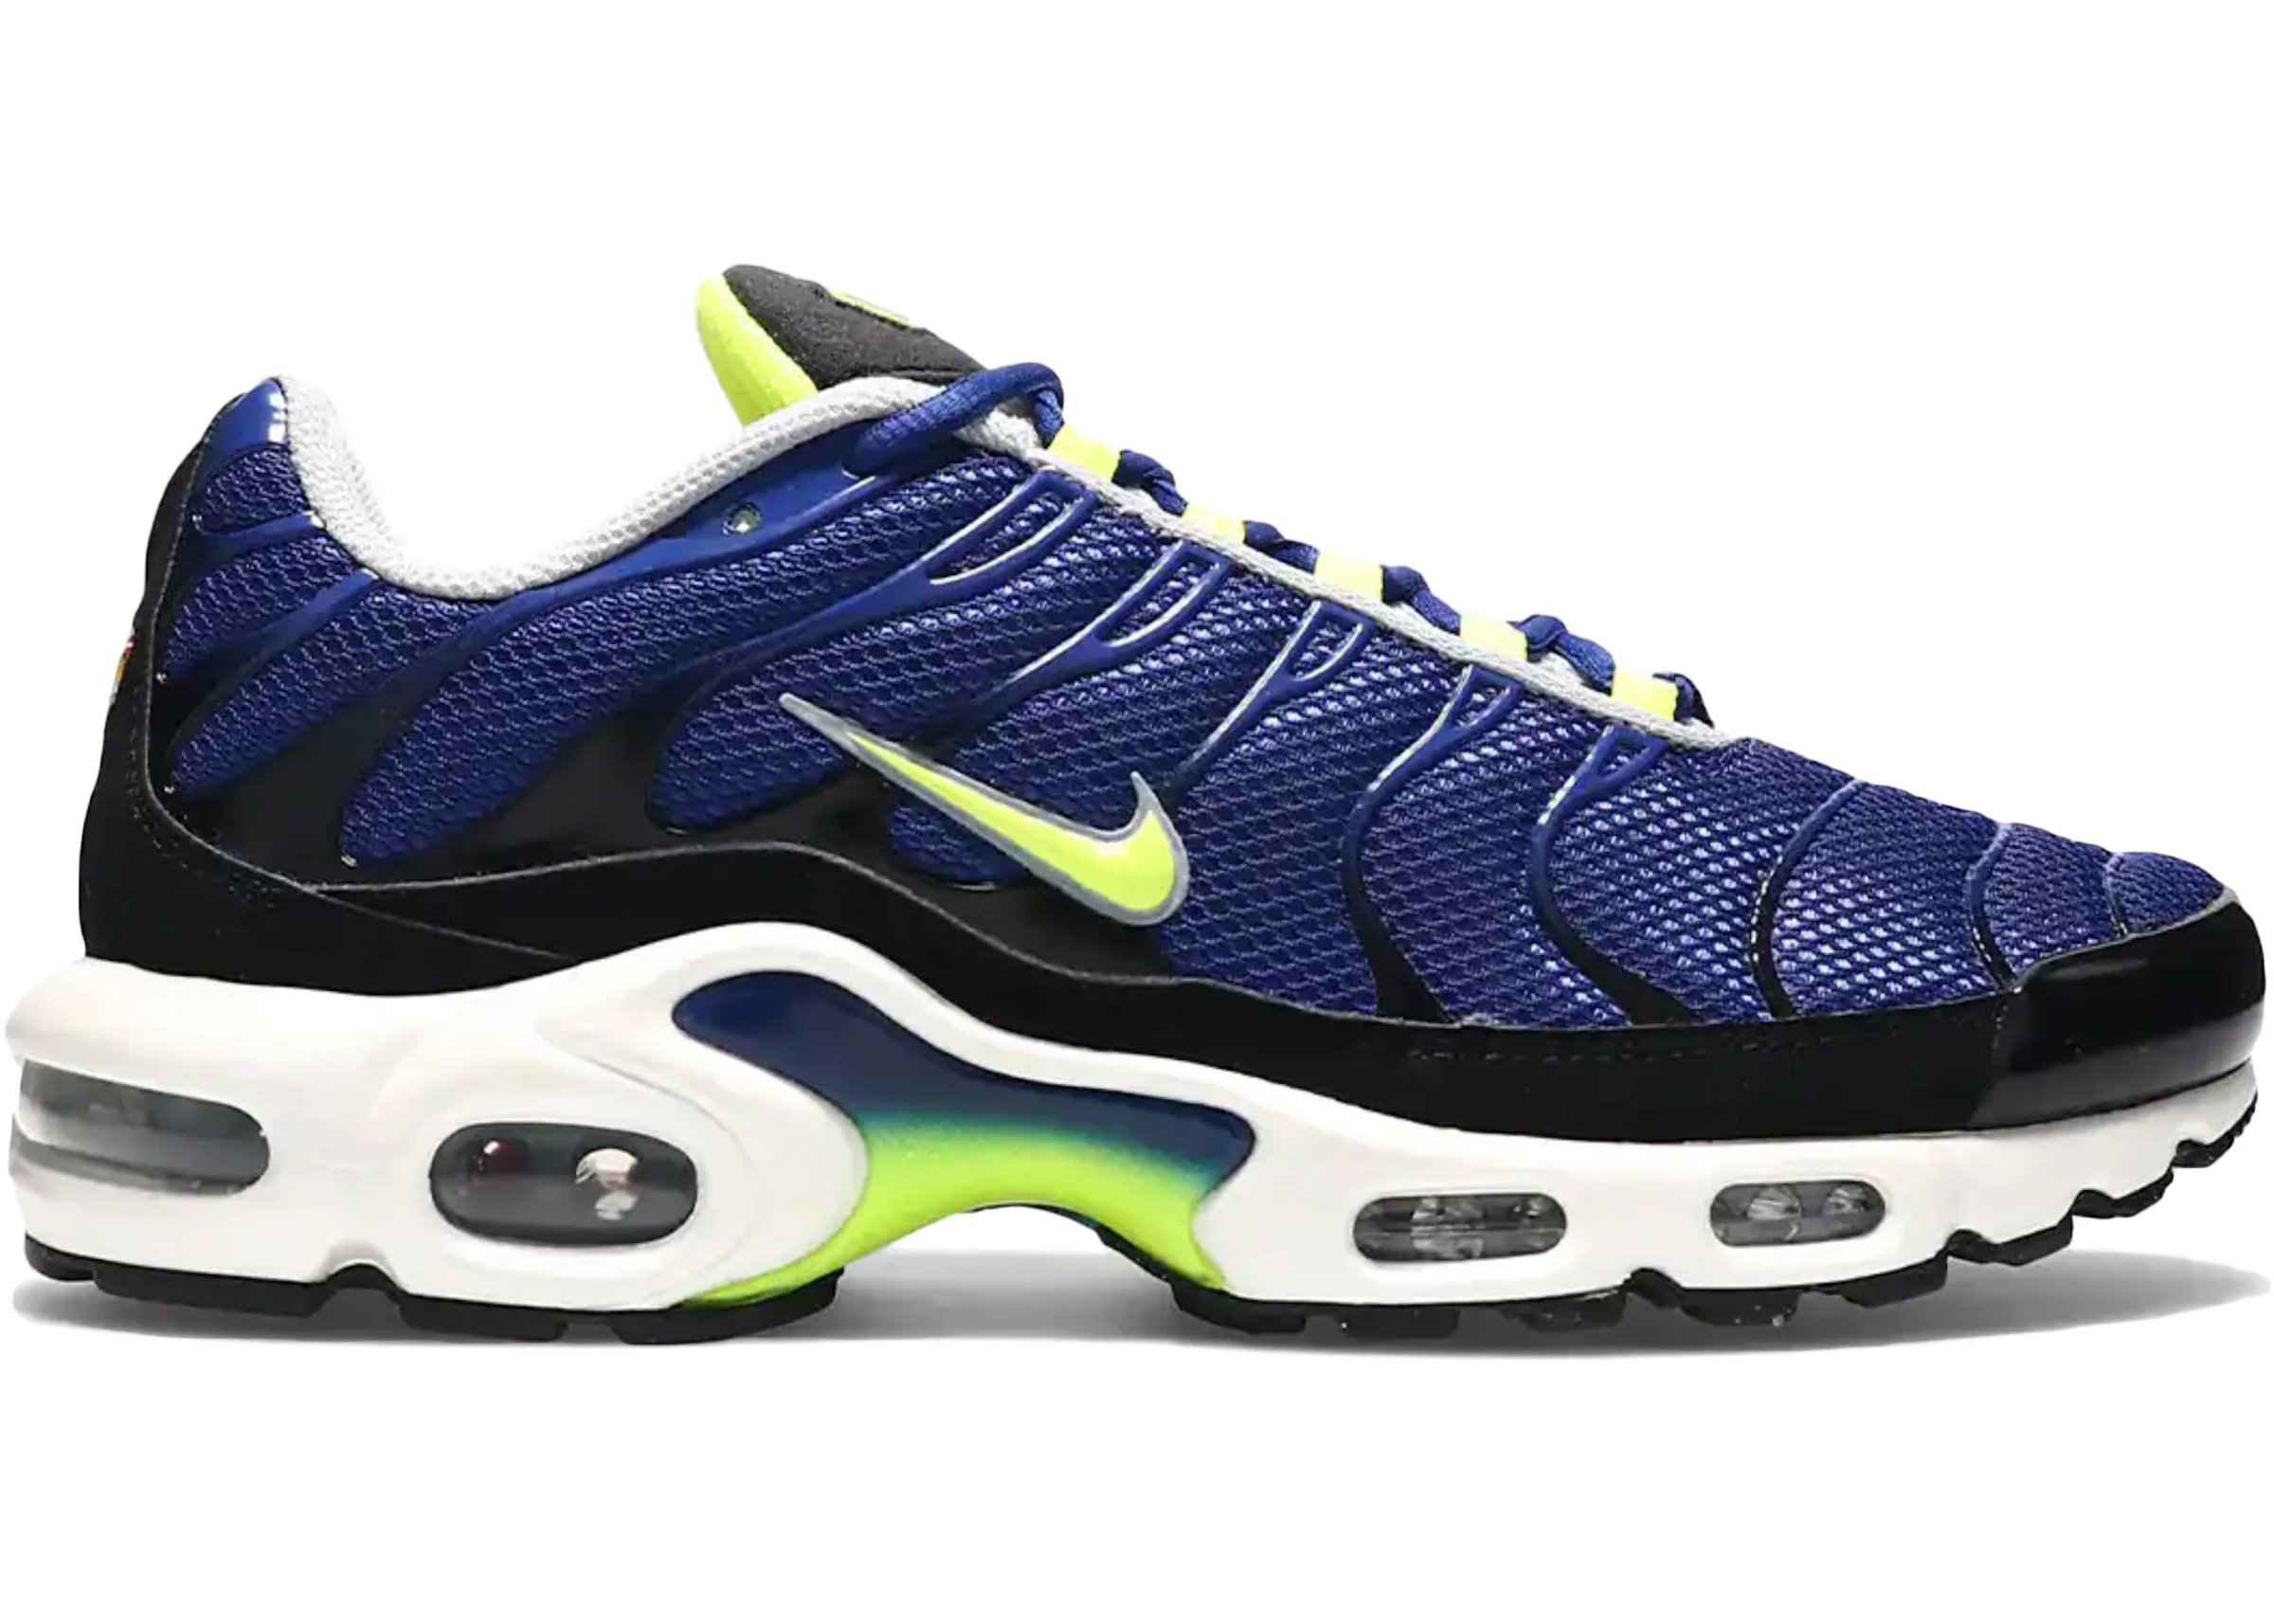 confess composite not Buy Nike Air Max Plus Shoes & New Sneakers - StockX